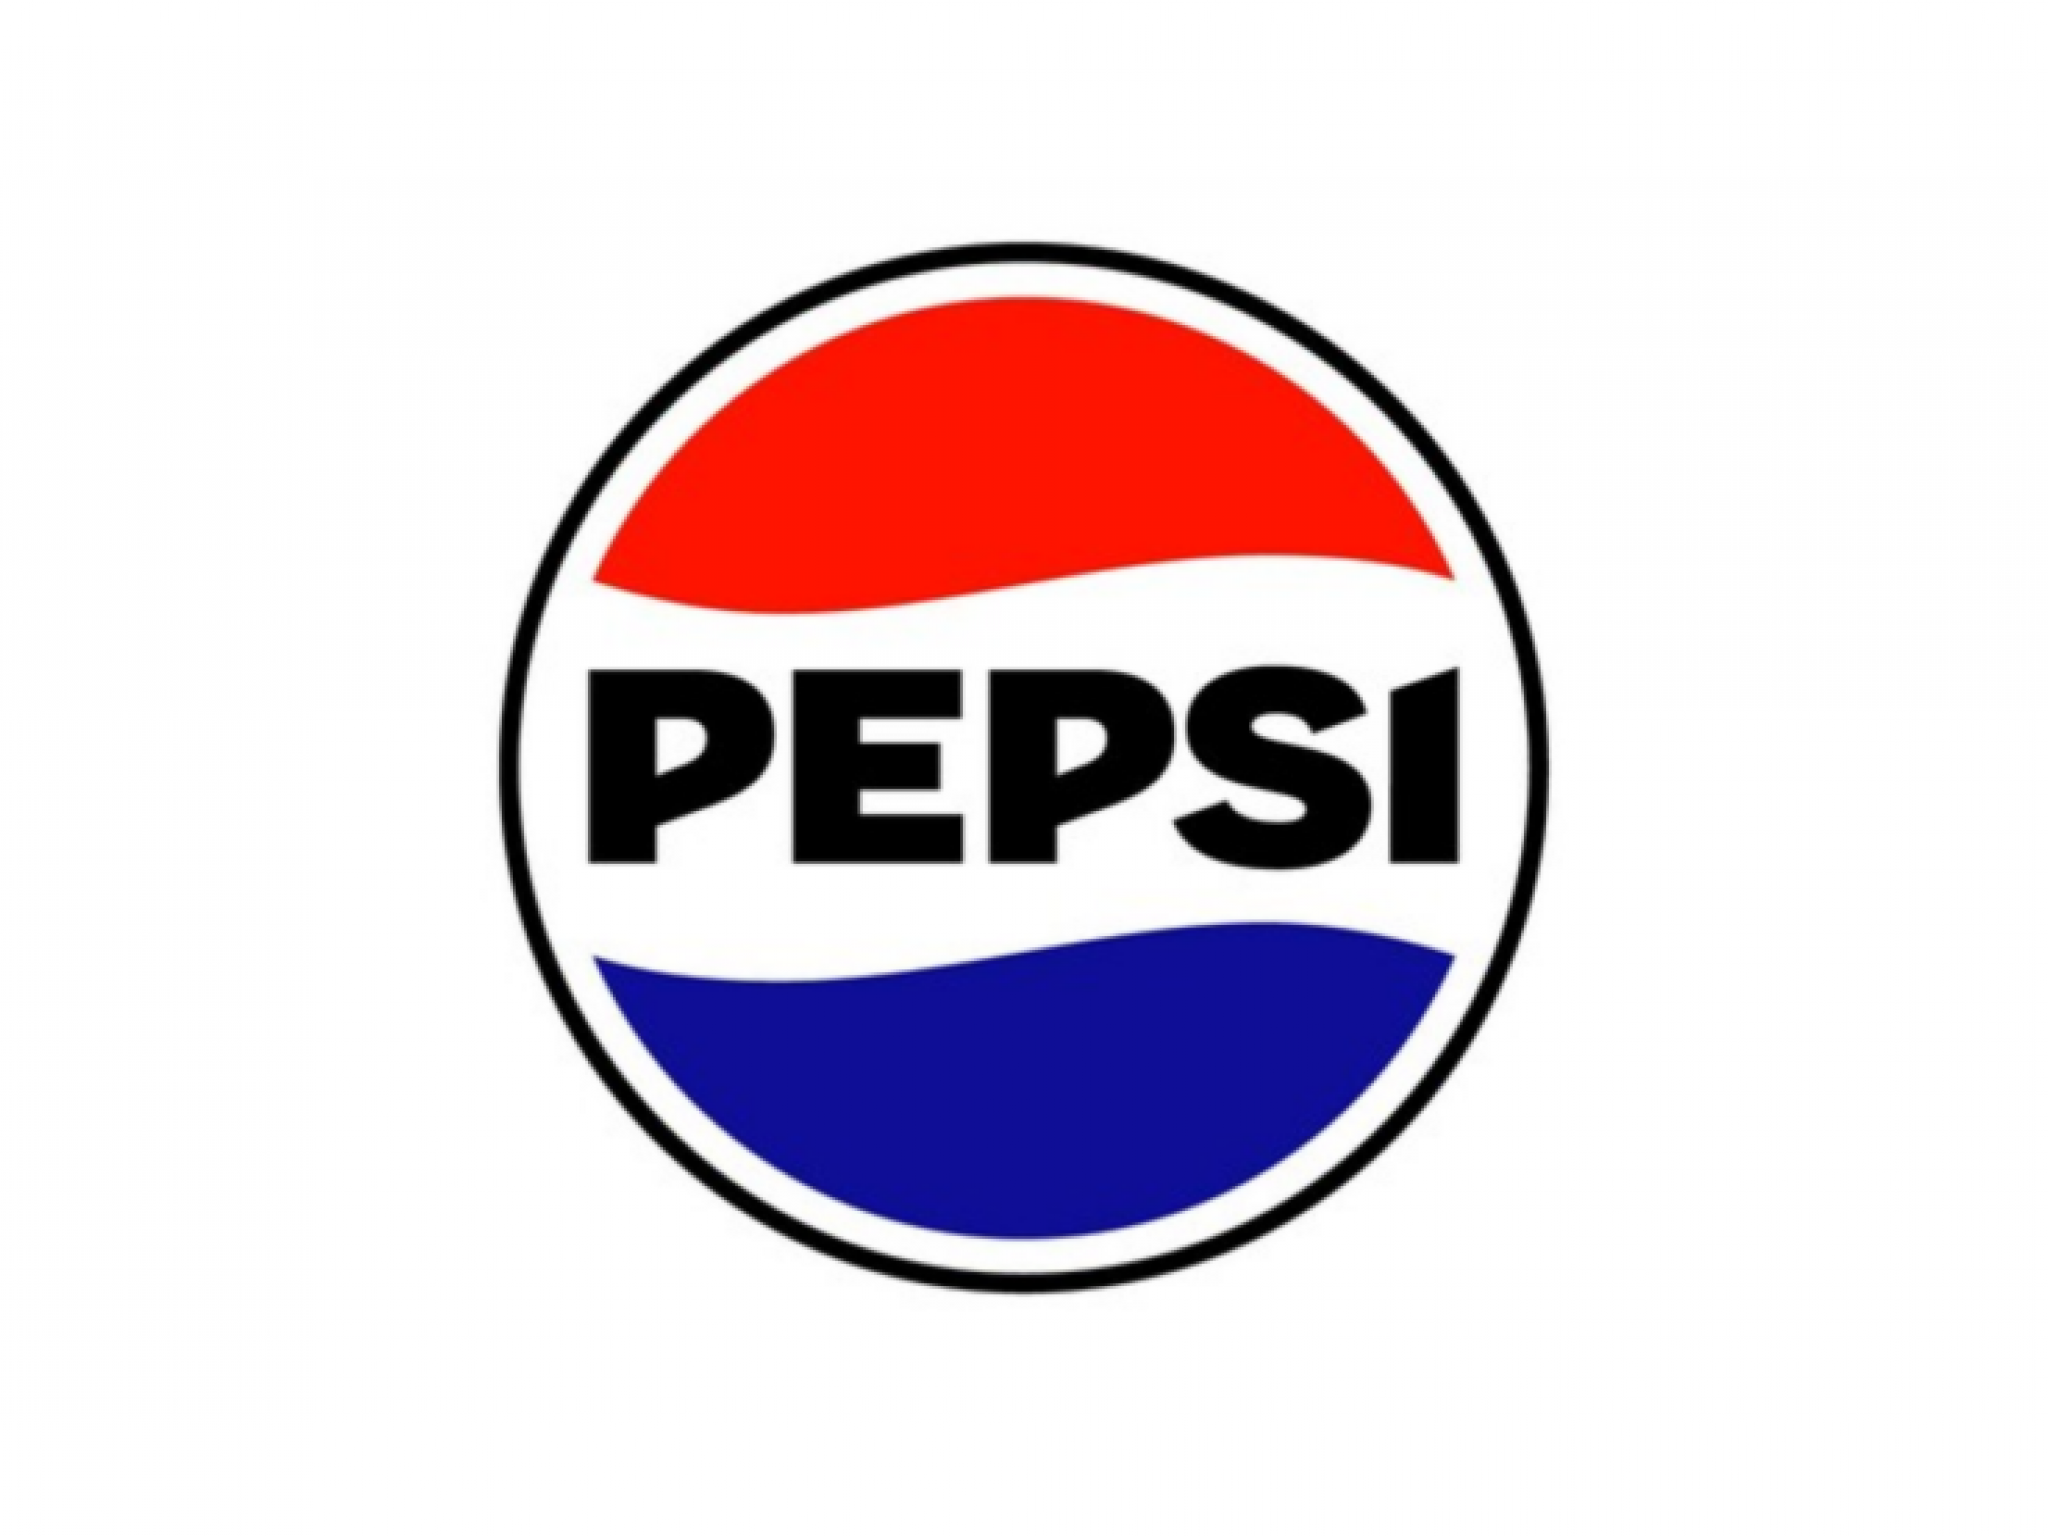  pepsis-fresh-face-revamps-logo-with-modern-flair-expanding-reach-in-120-countries 